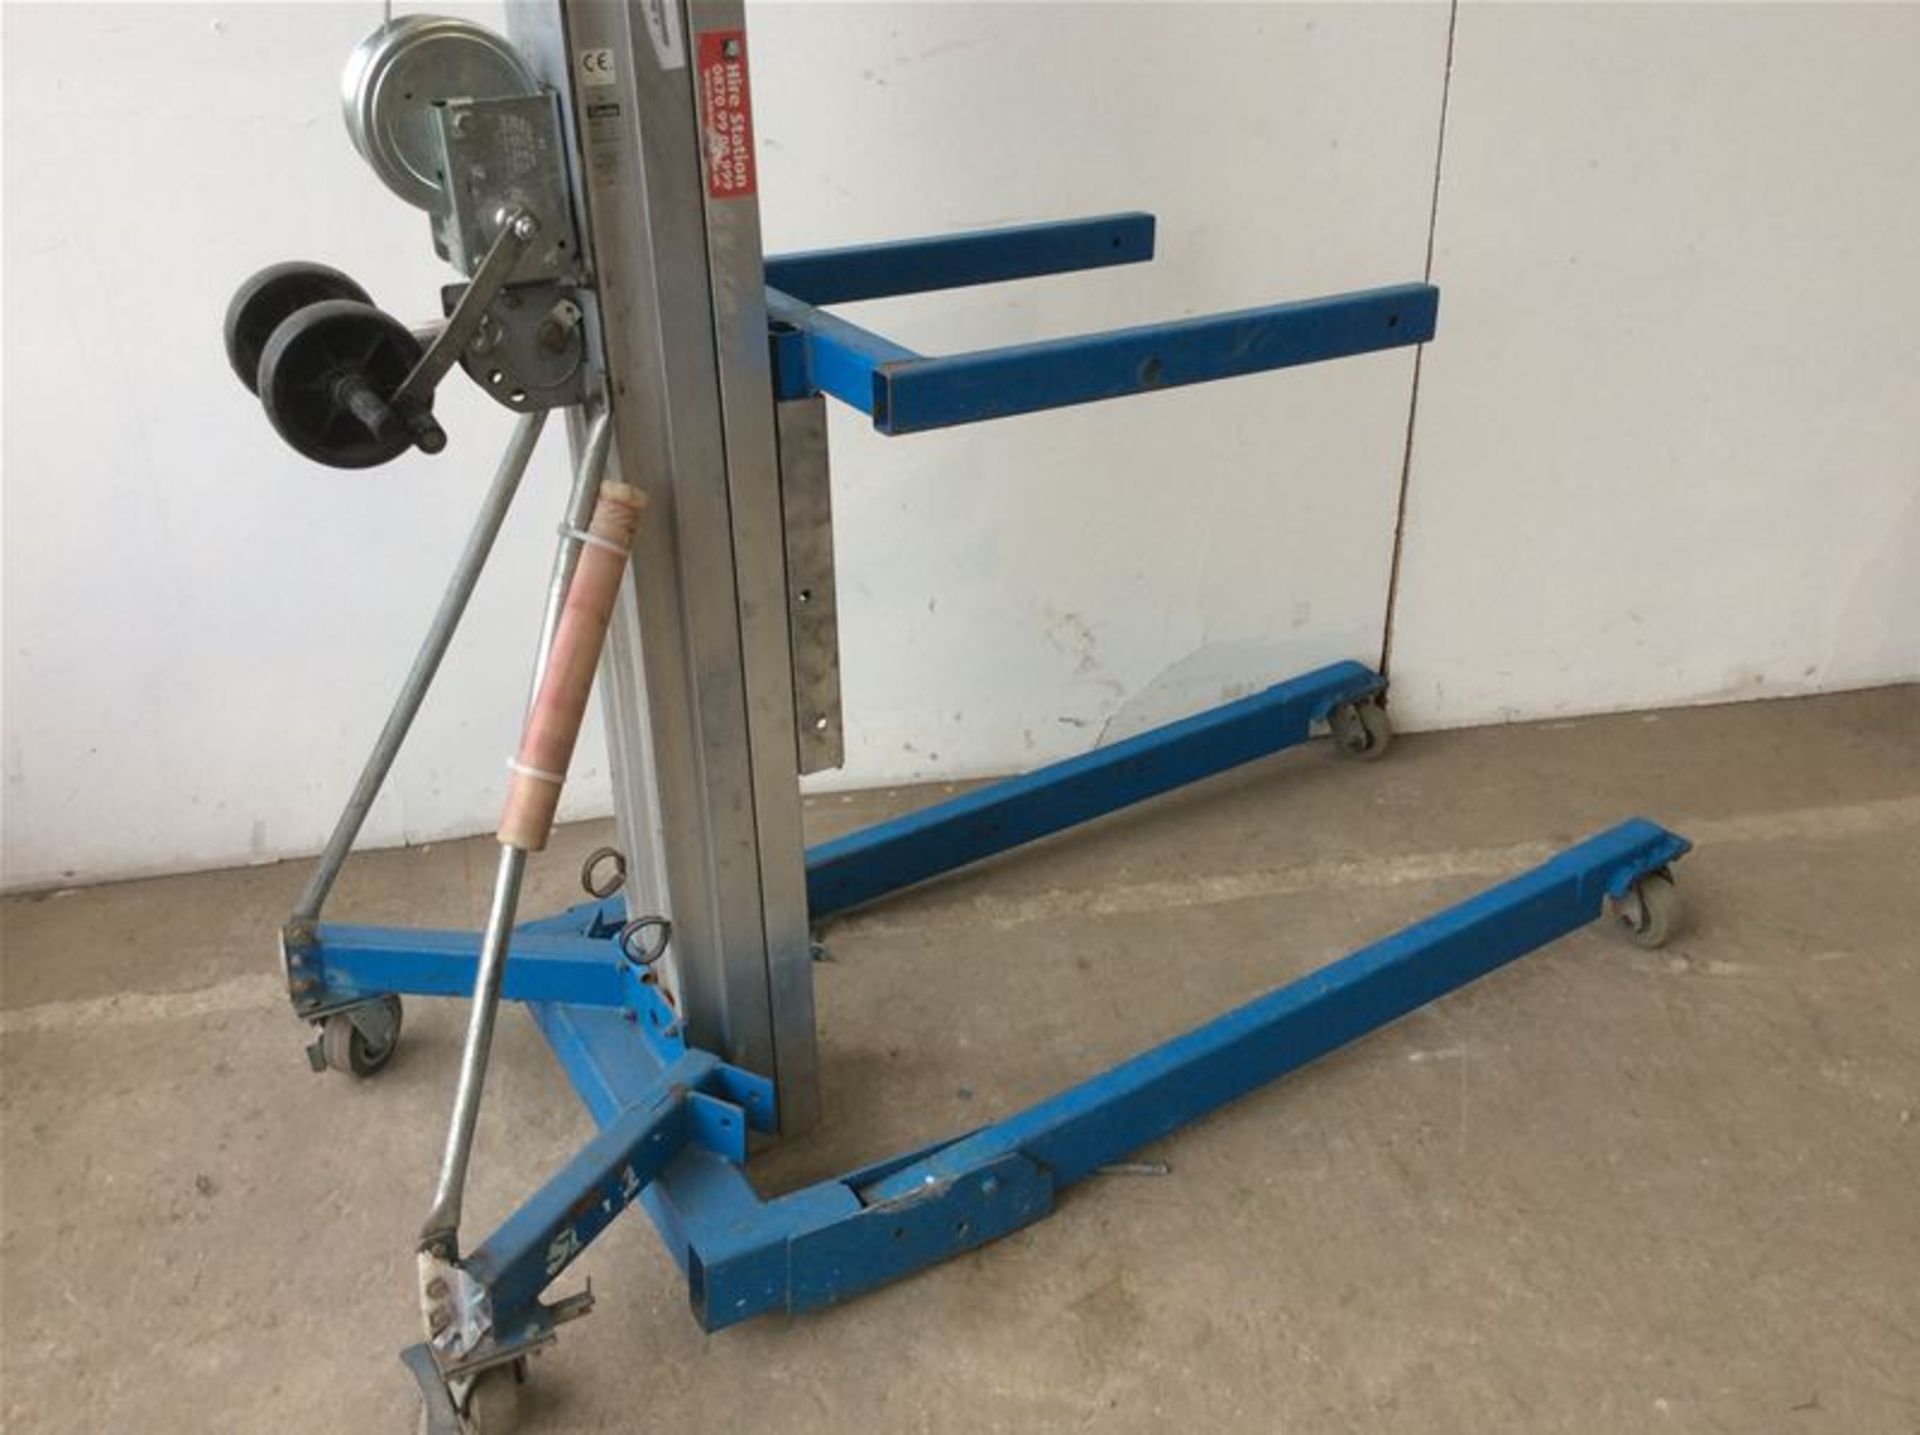 GENIE SUPERLIFT SLA10 454KG LIFTER/STACKER - MANUAL WITH FORK ATTCHMENT